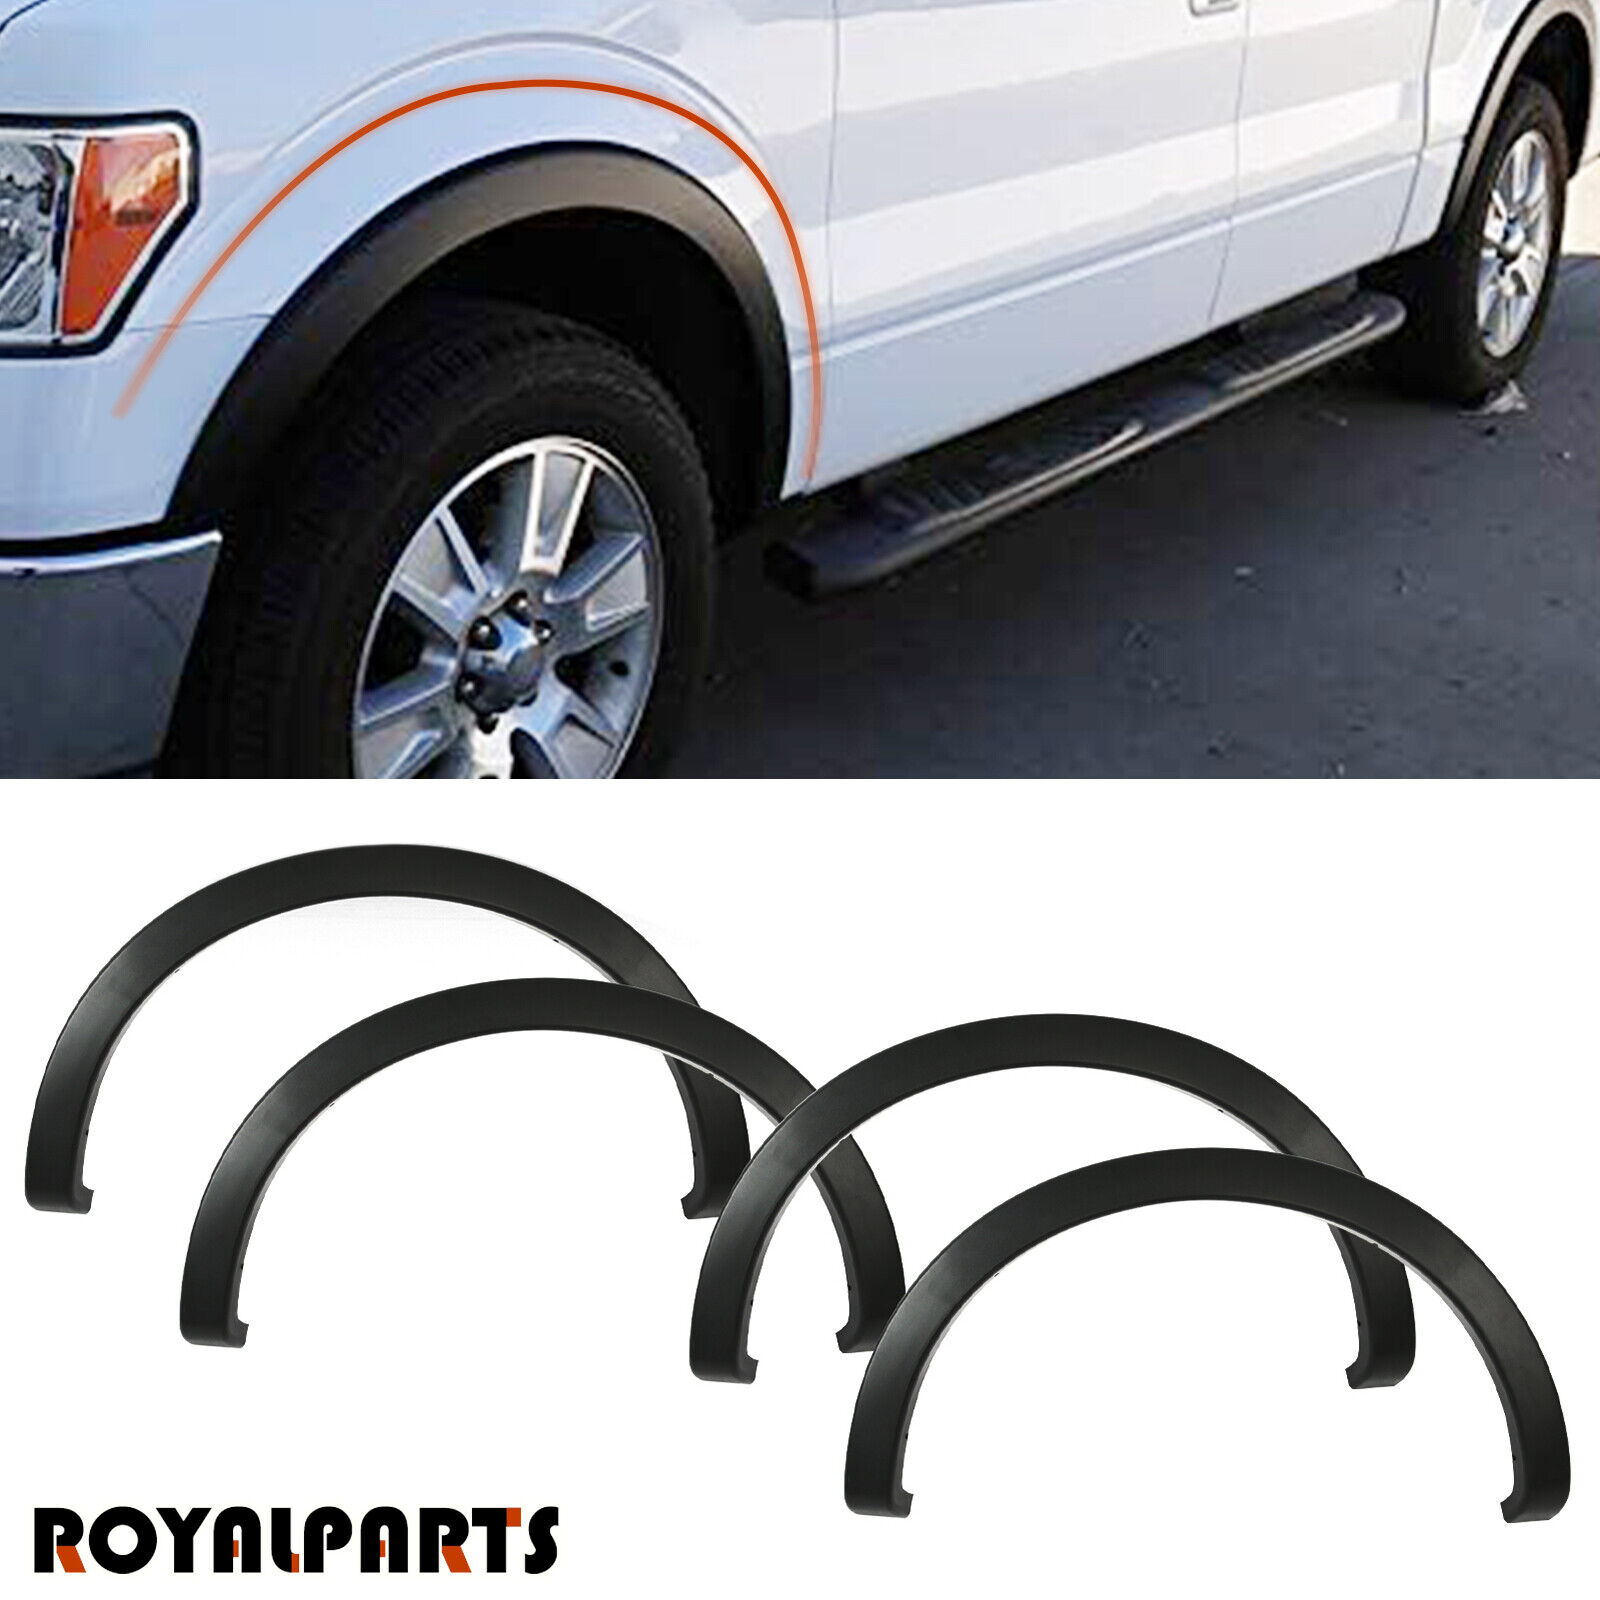 For 2009-2014 Ford F150 Factory Style Matte Fender Flare Wheel Protector Set 4PC